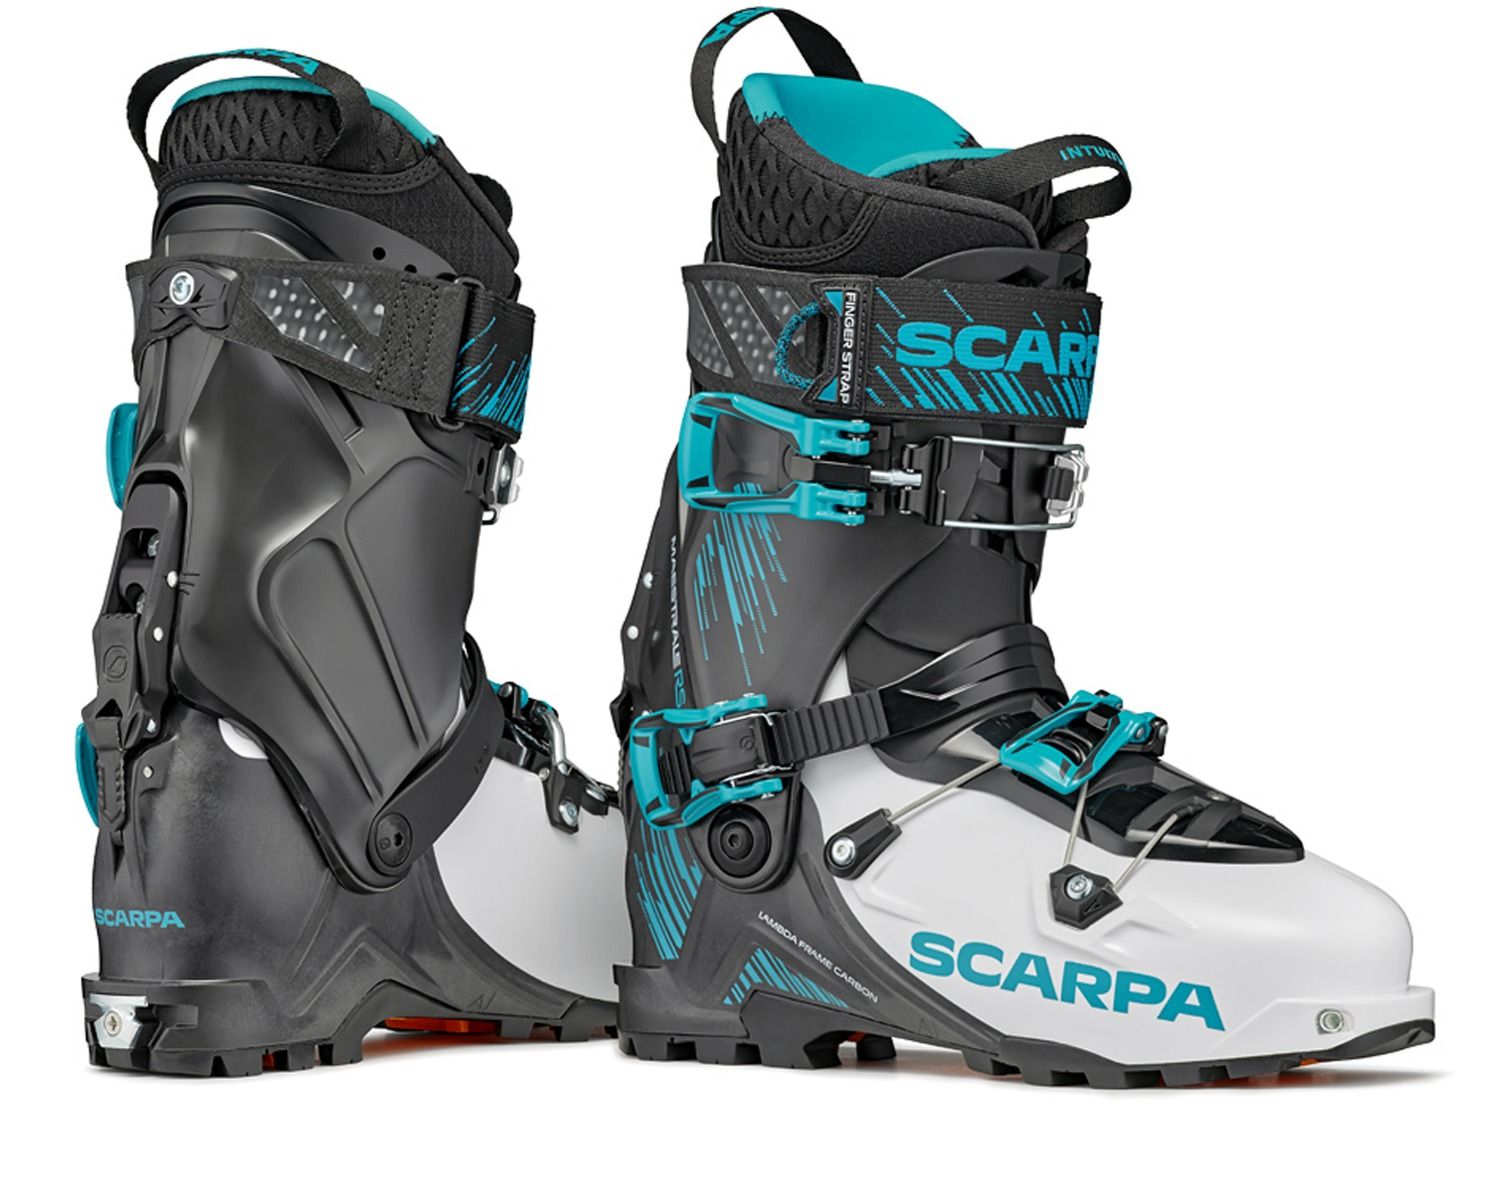 white and black three buckle, 2 piece ski touring boots, Scarpa meastrale 2022